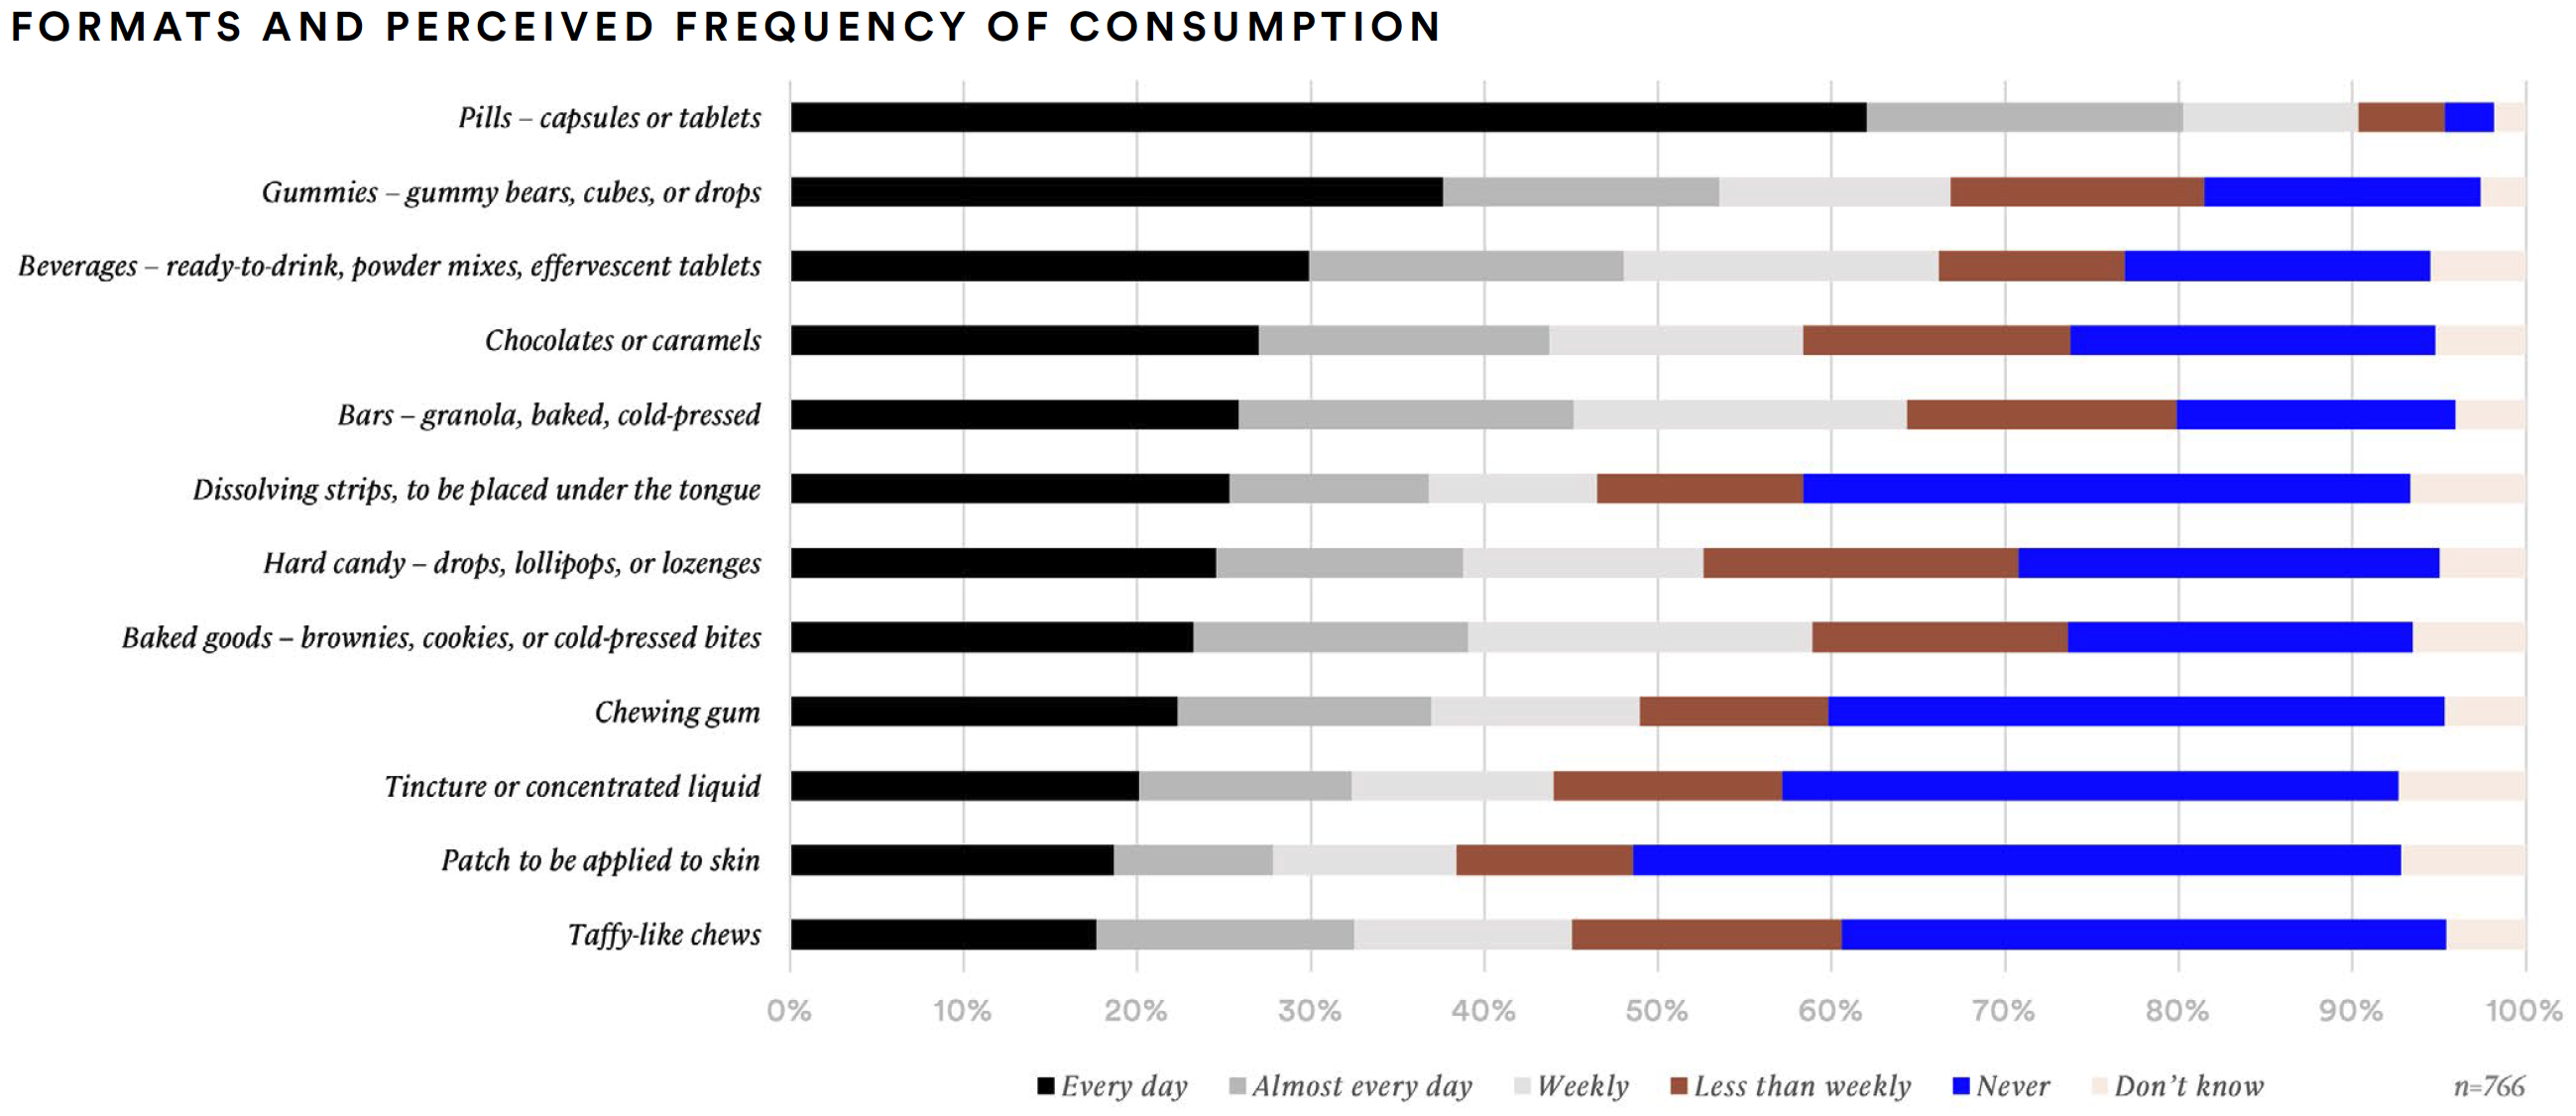 formats and perceived frequency of consumption table